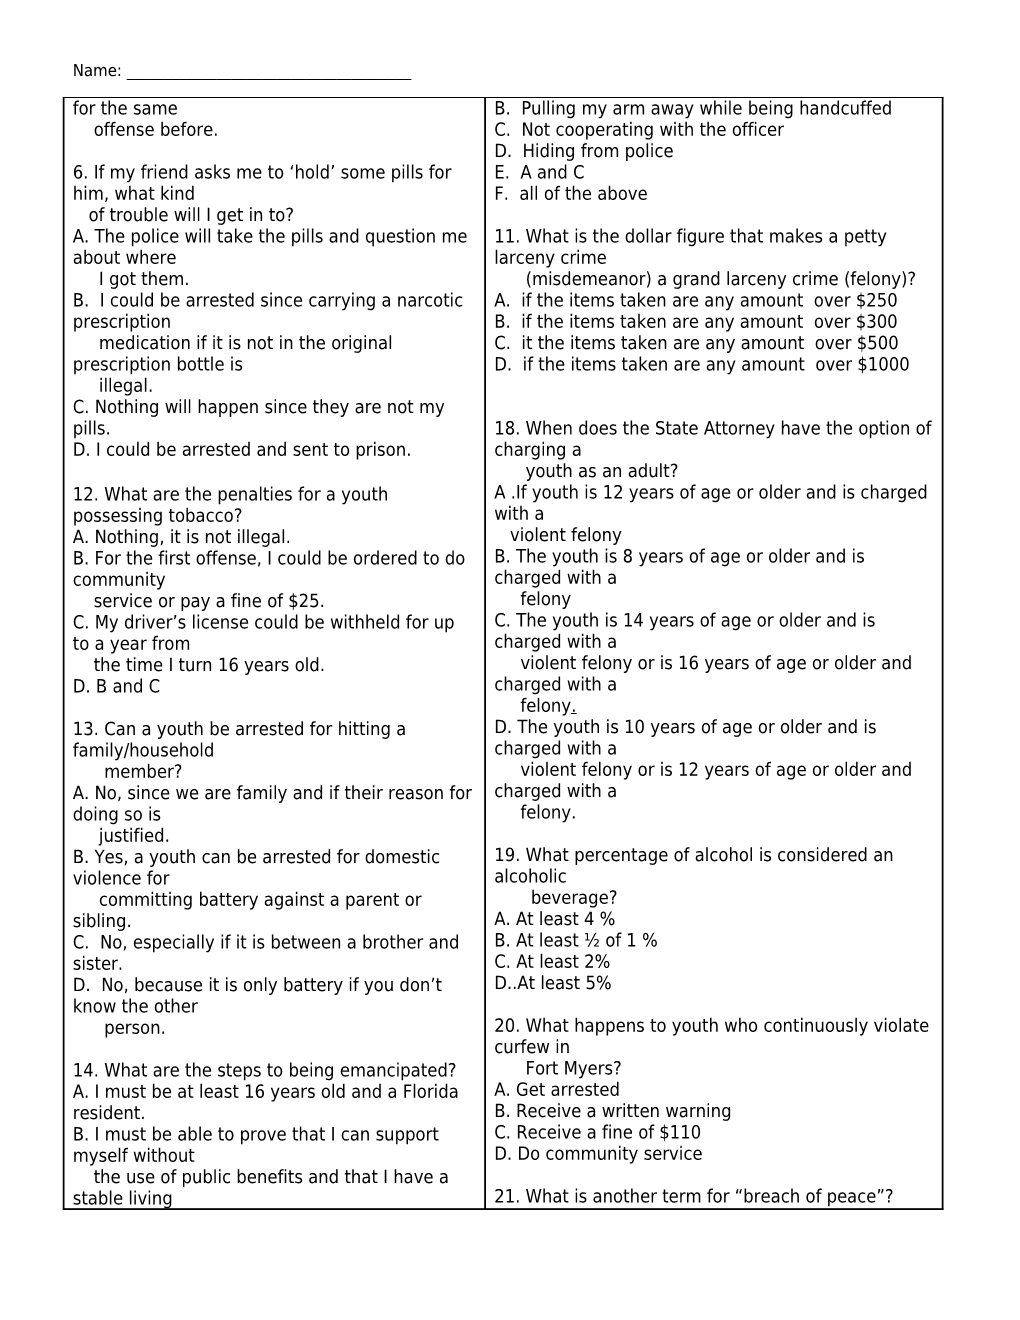 Know the Law Worksheet